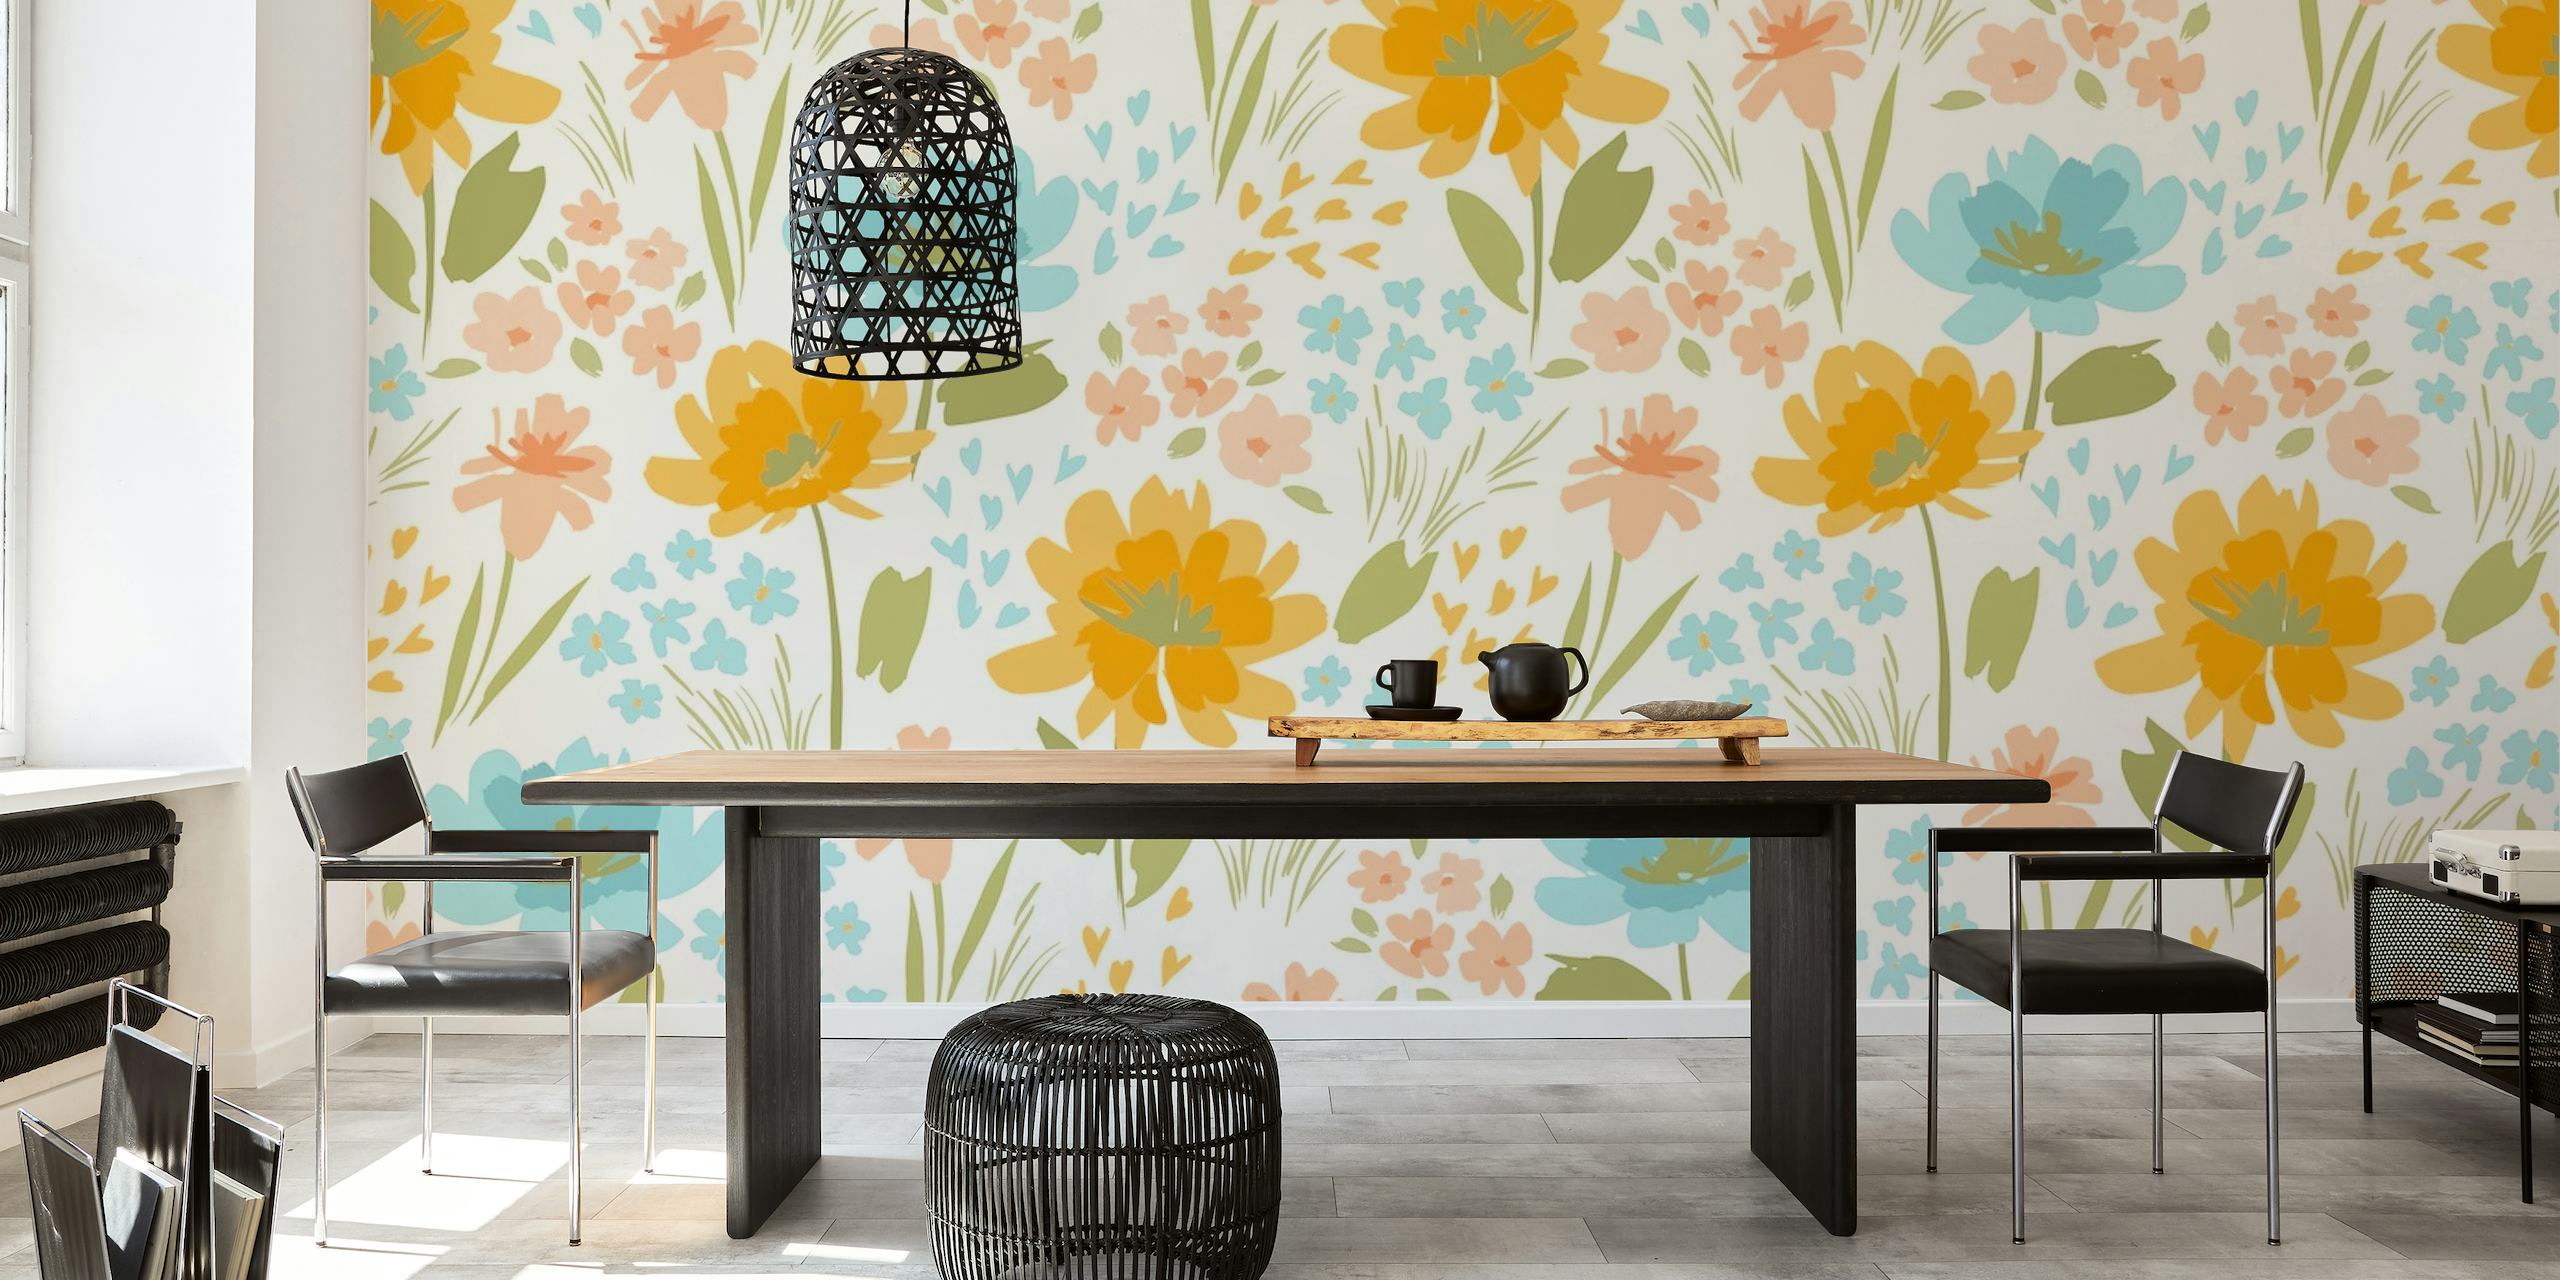 Bright and sunny floral wall mural with orange, yellow, and blue flowers